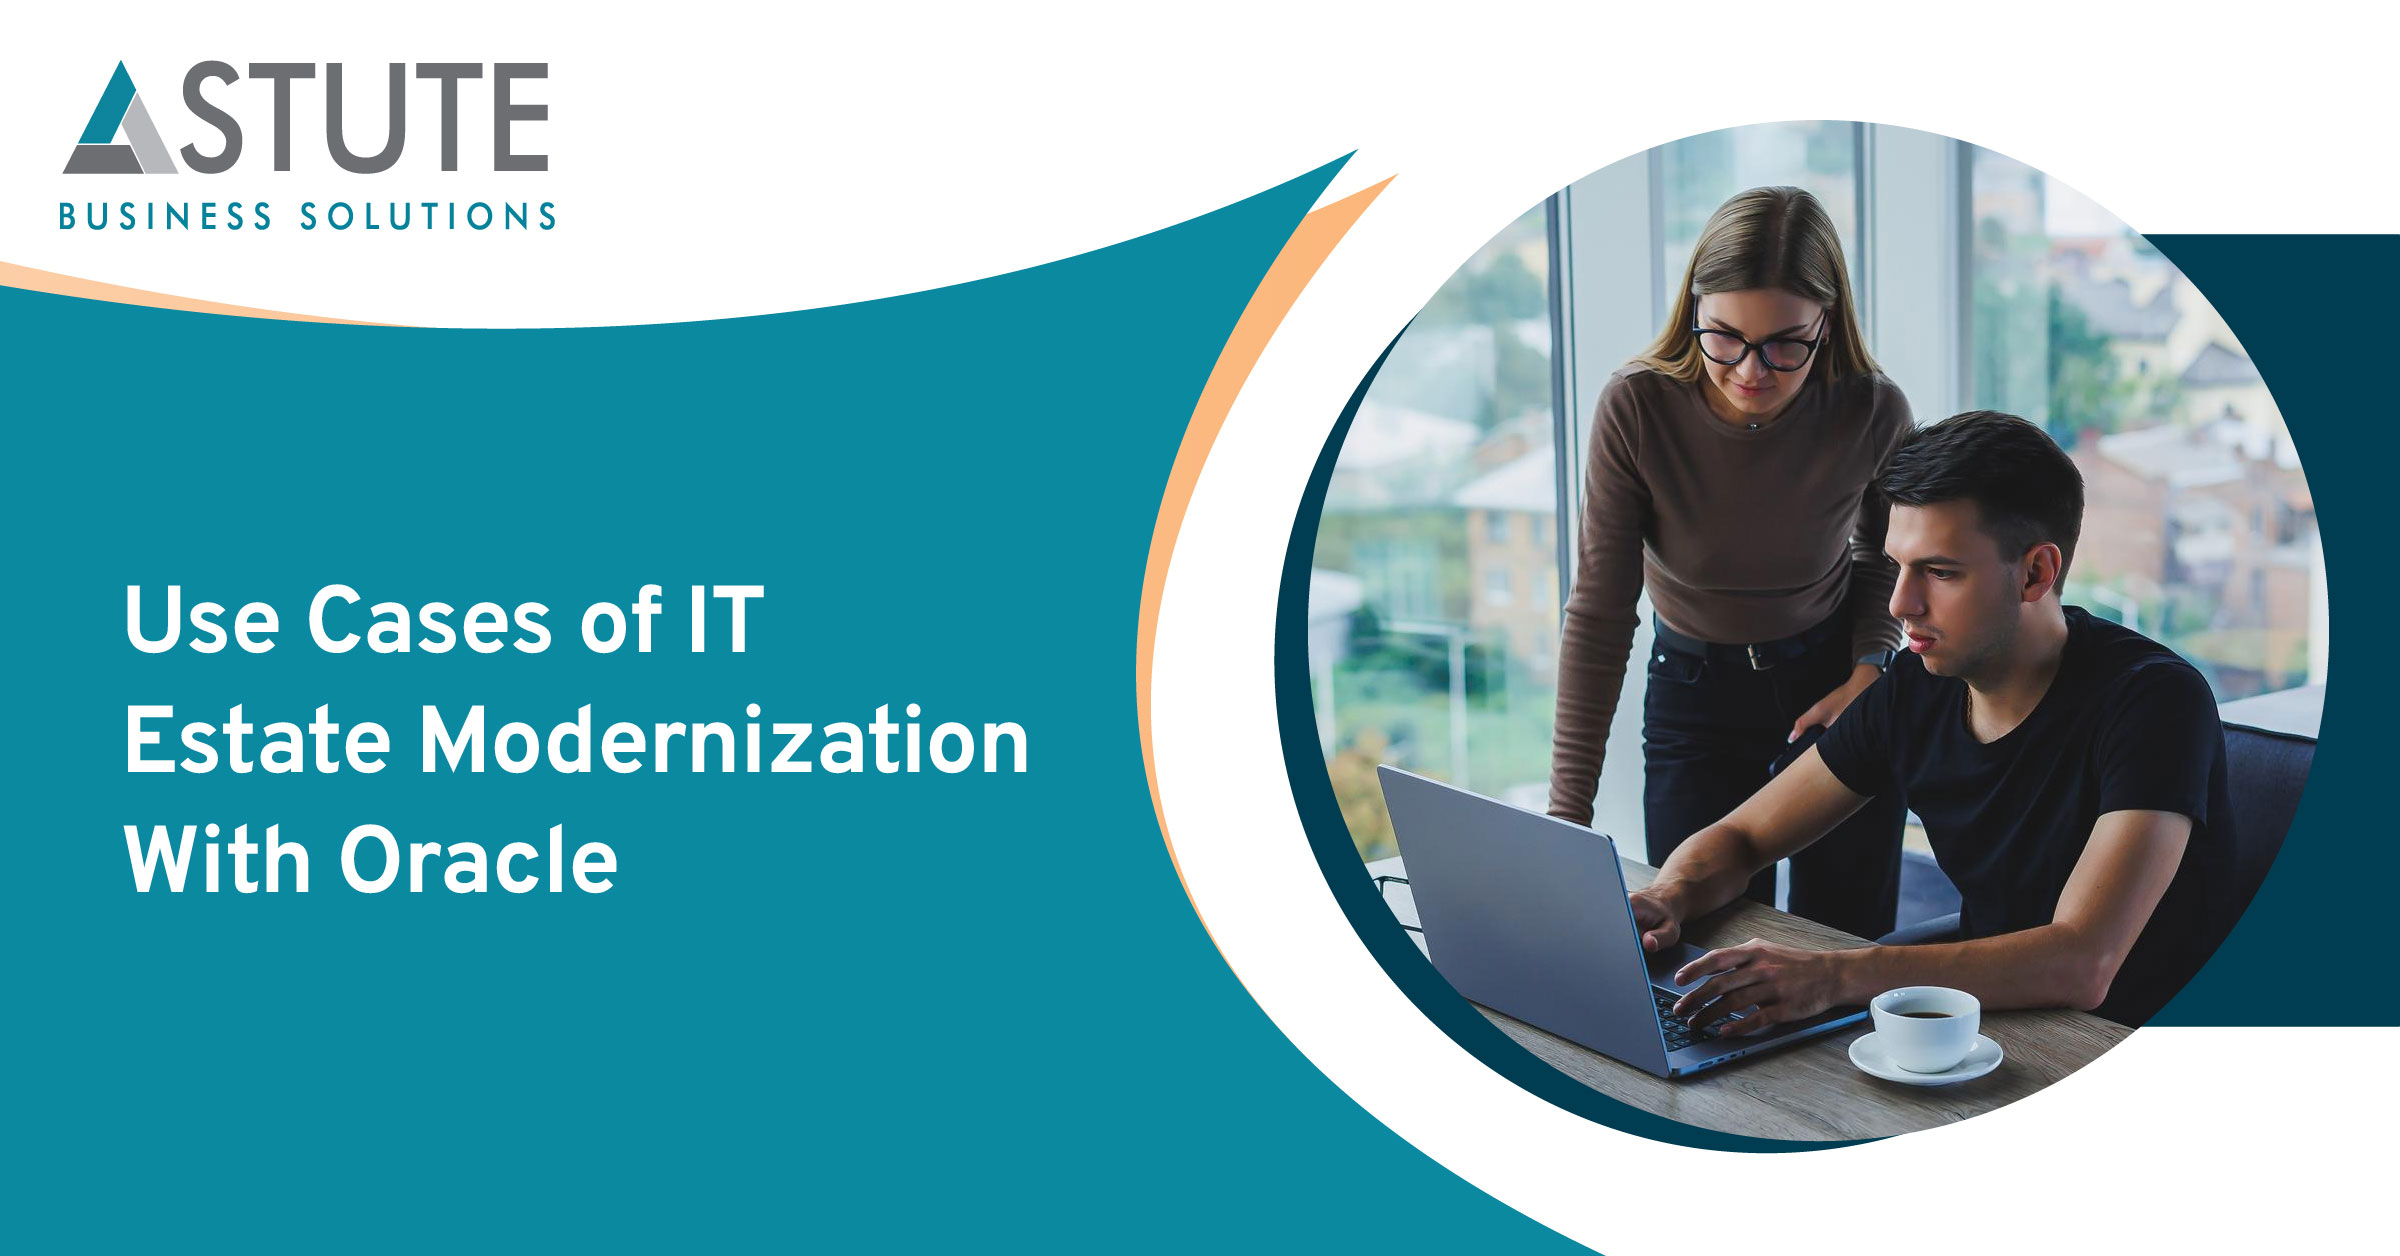 Use Cases of IT Estate Modernization With Oracle